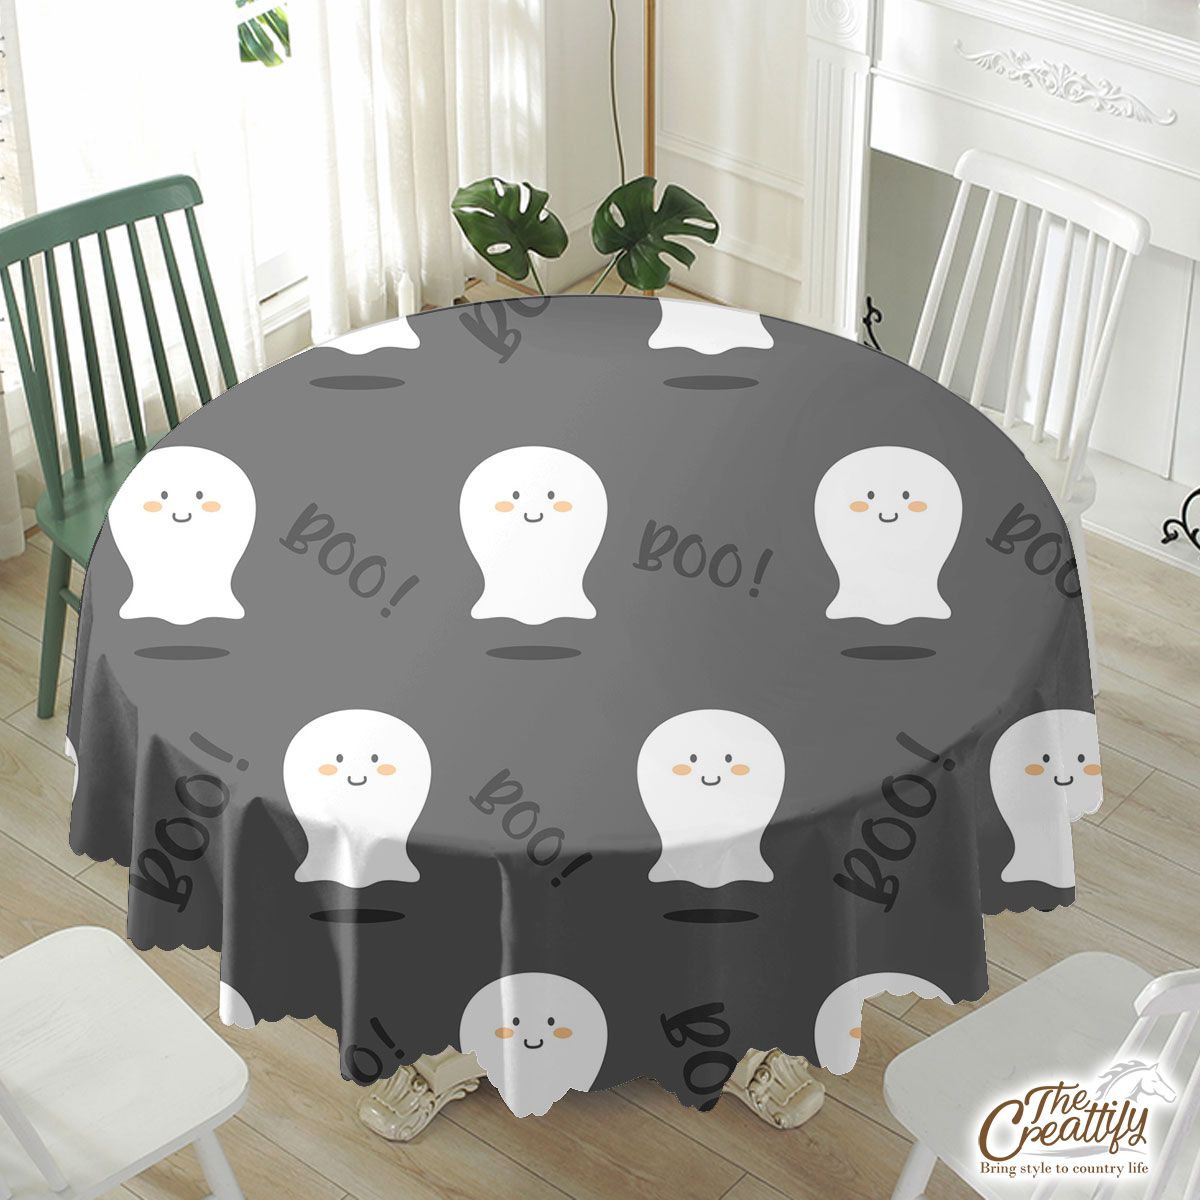 Cute and Funny White Boo Ghost Halloween Waterproof Tablecloth